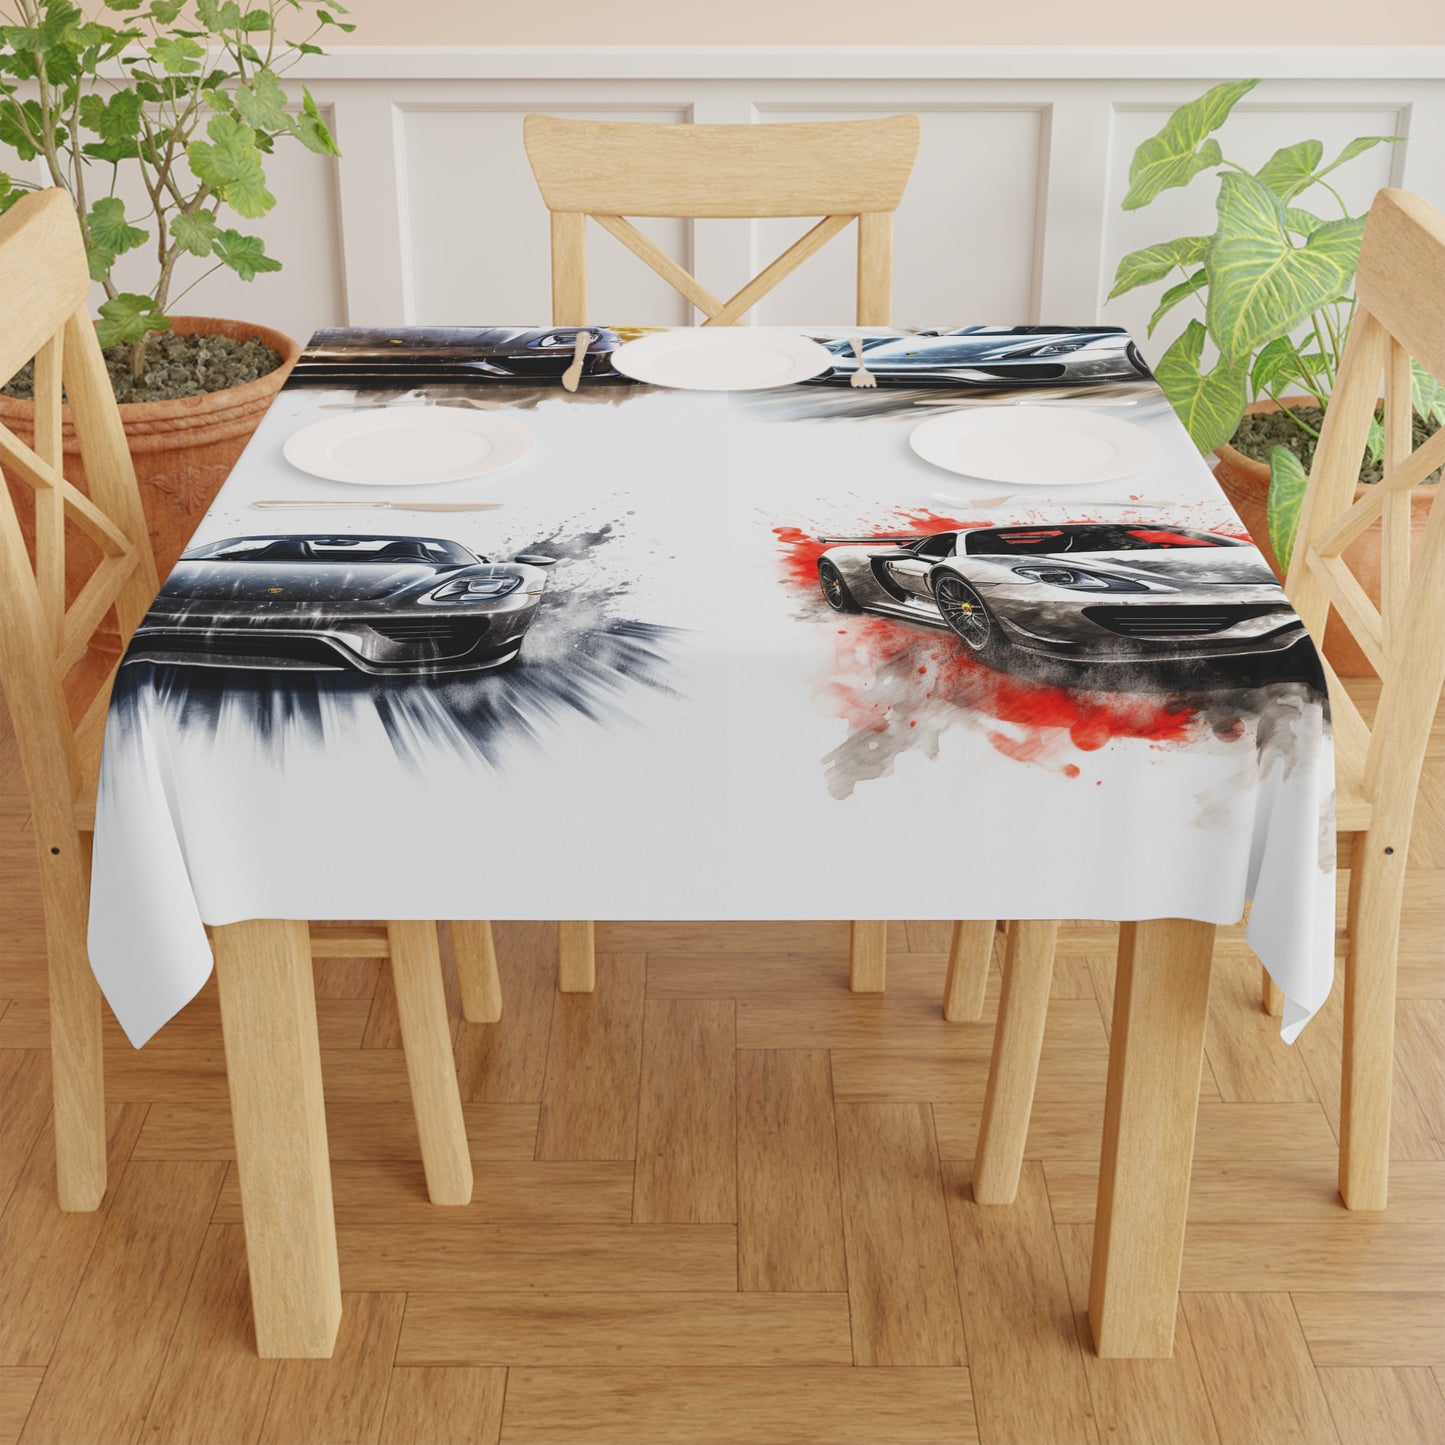 Tablecloth 918 Spyder white background driving fast with water splashing 5